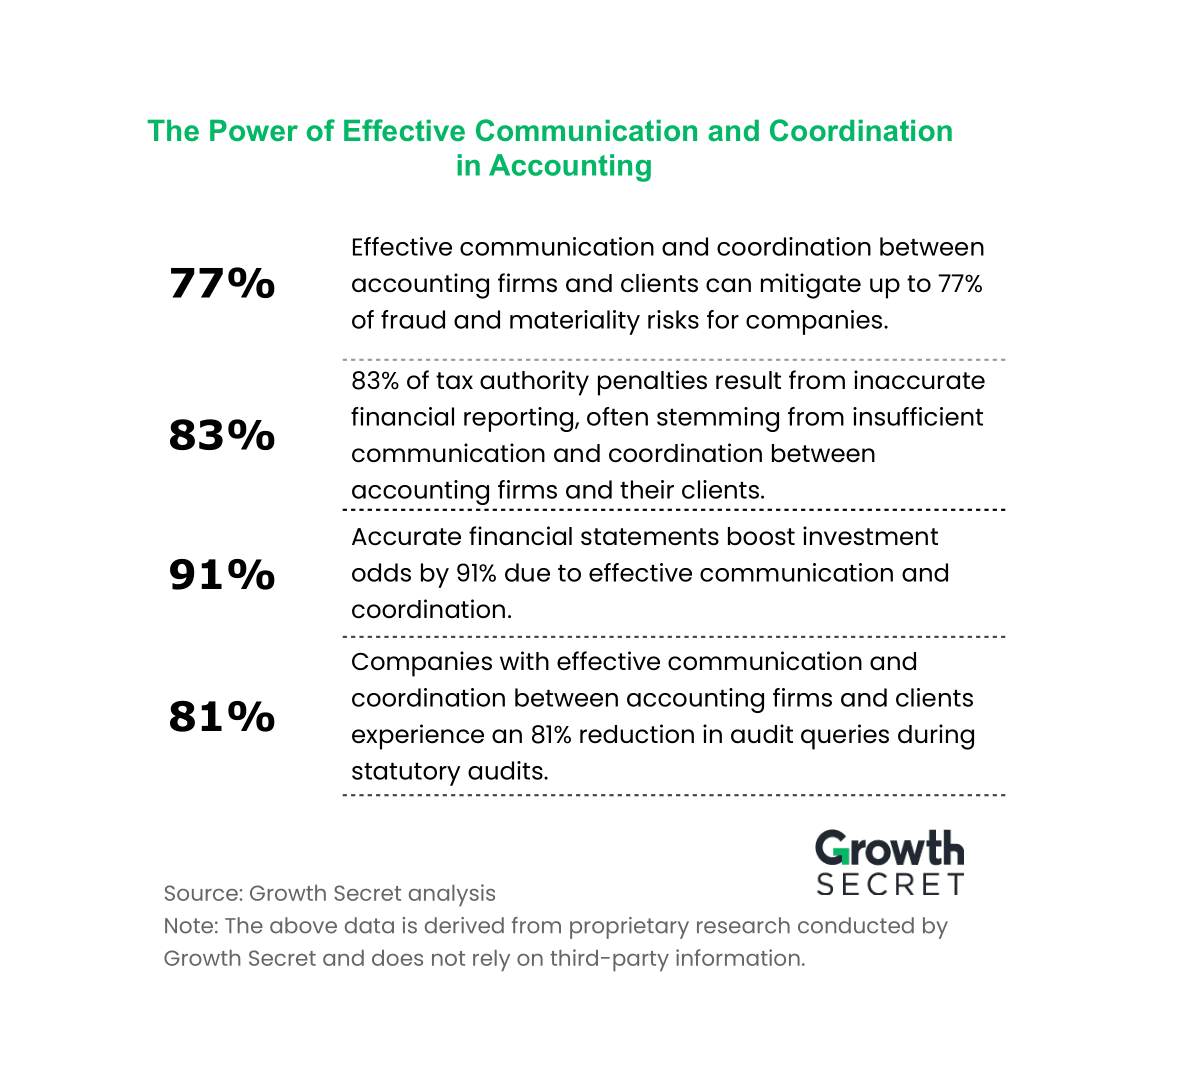 The power of effective communication and coordination in Accounting